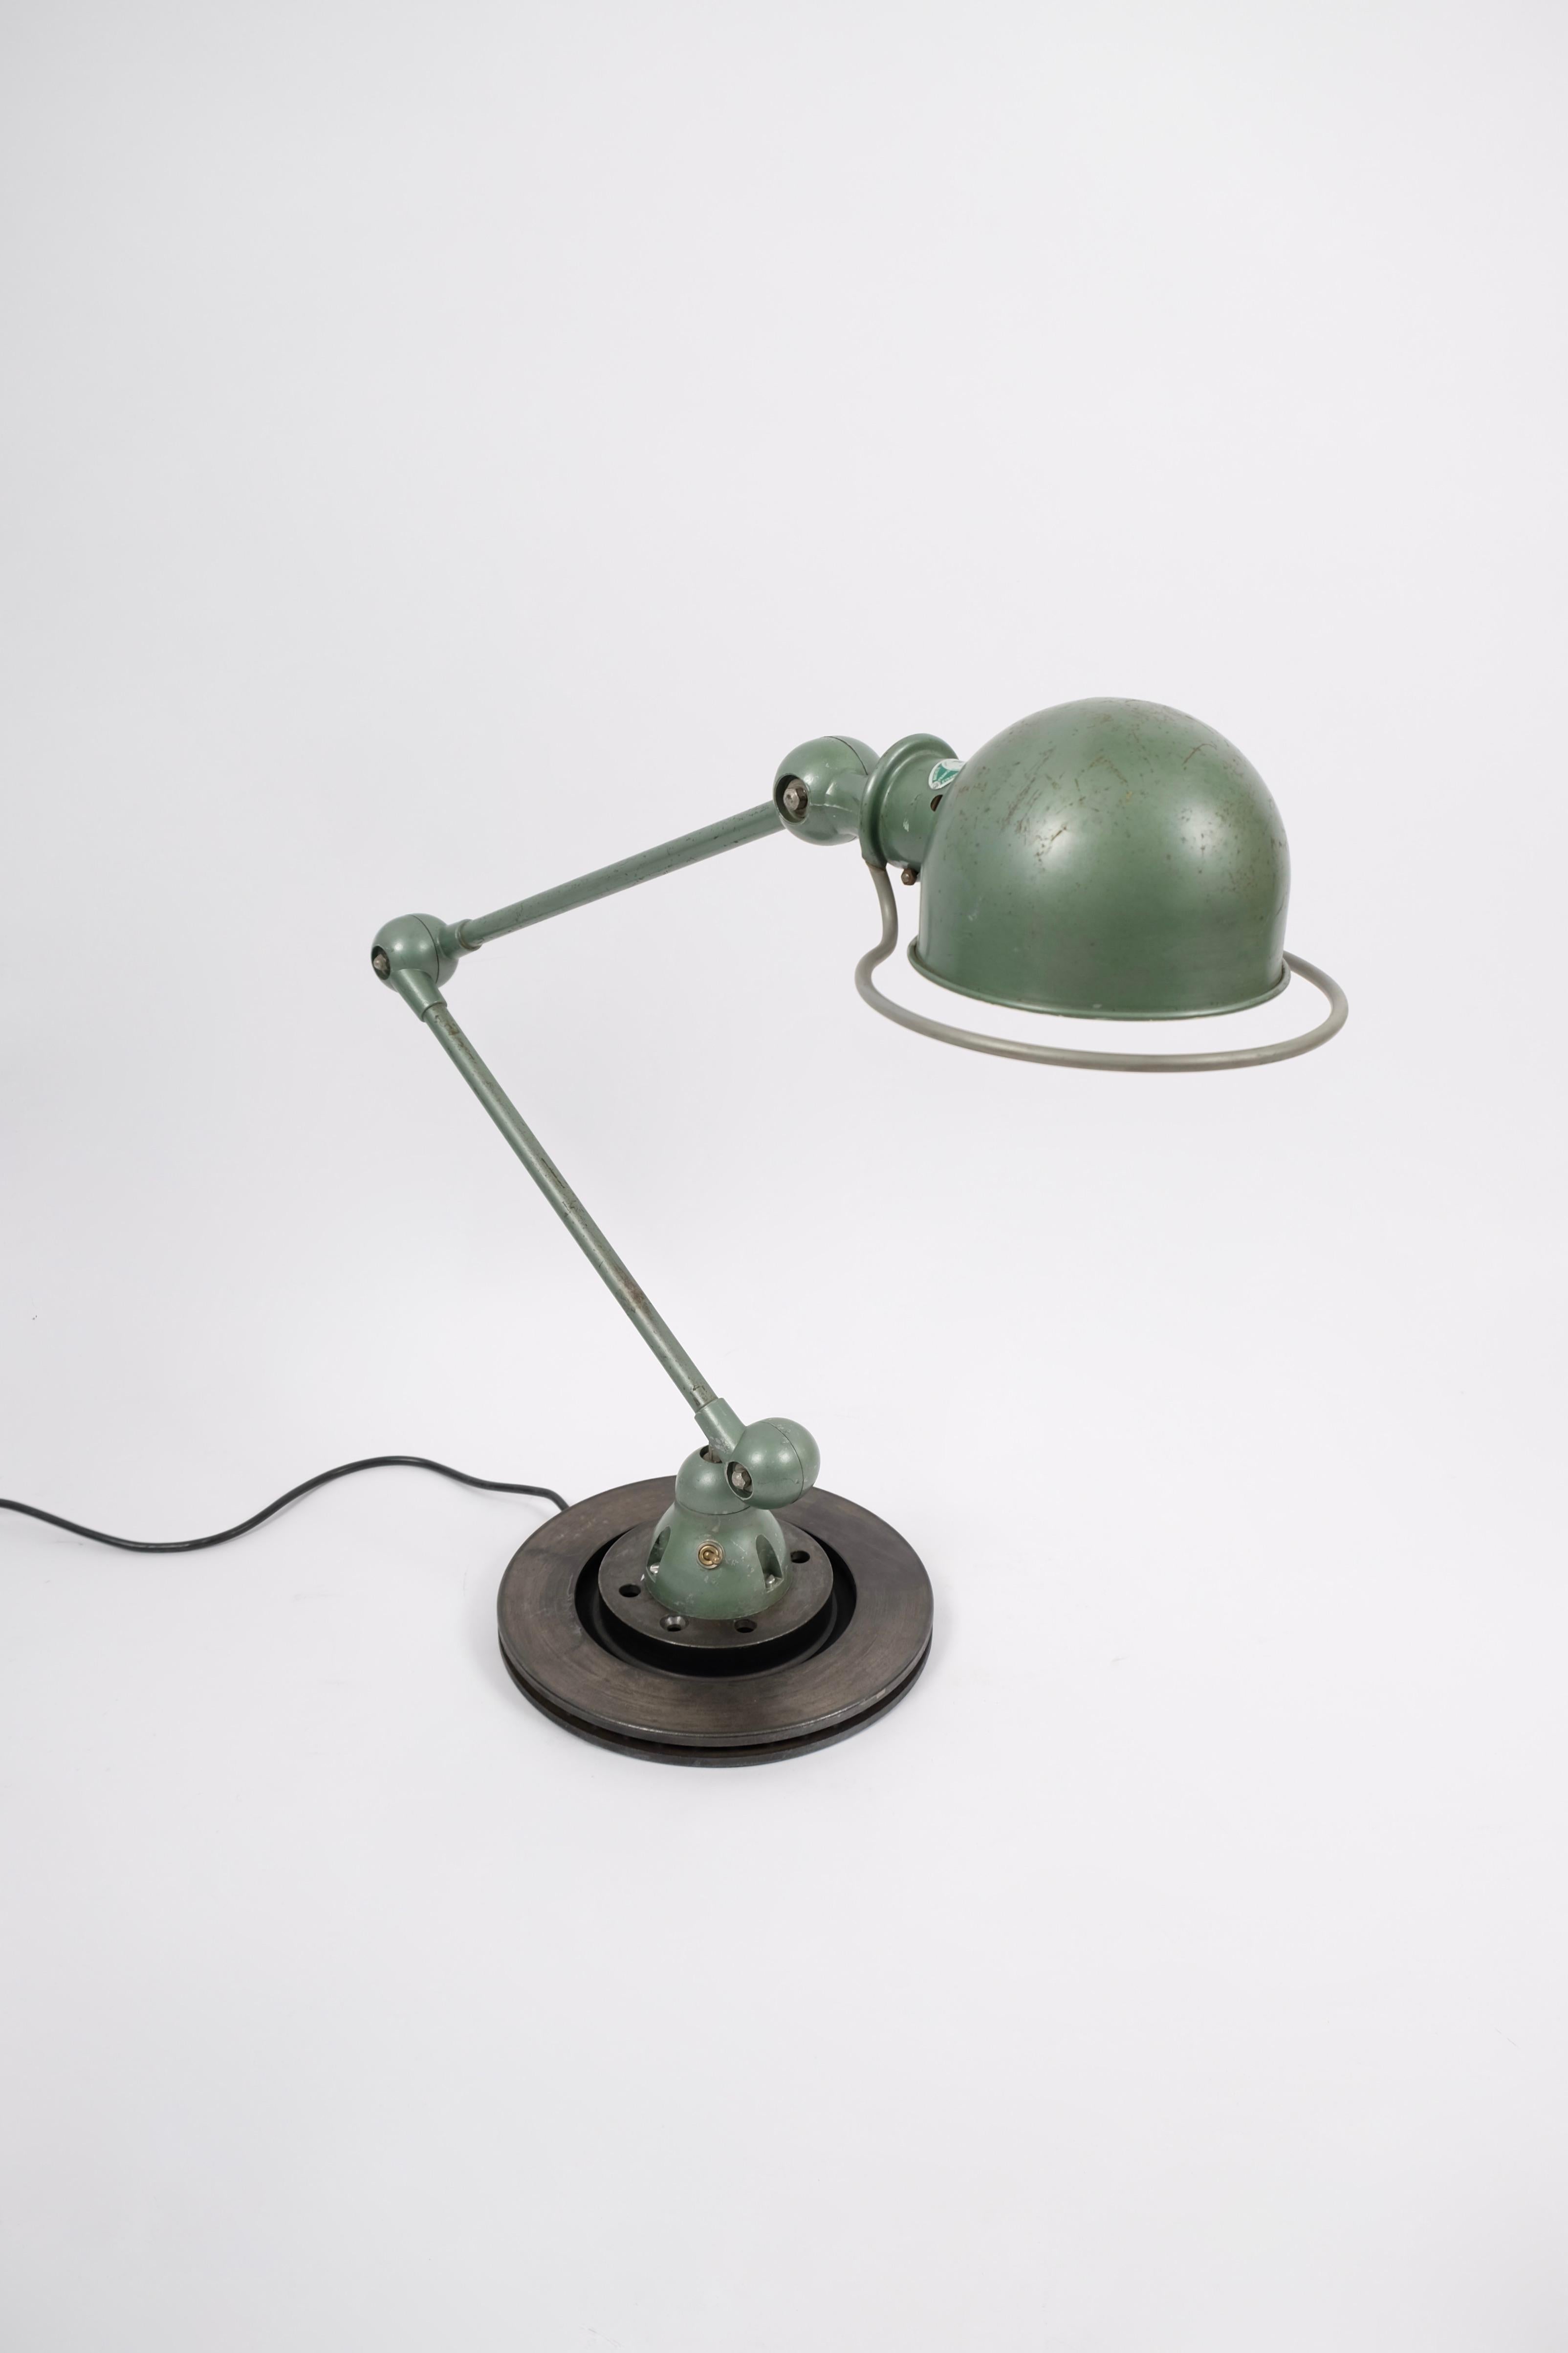 Beautiful working lamp in original Vespa green lacquer.
Features a blue metal plate from the maker.
Each arm measures 45 cm and can be moved horizontally.
The shade/head pivots 360 degrees around the shade holder.
Mounted on 5 Kilo brake disc to